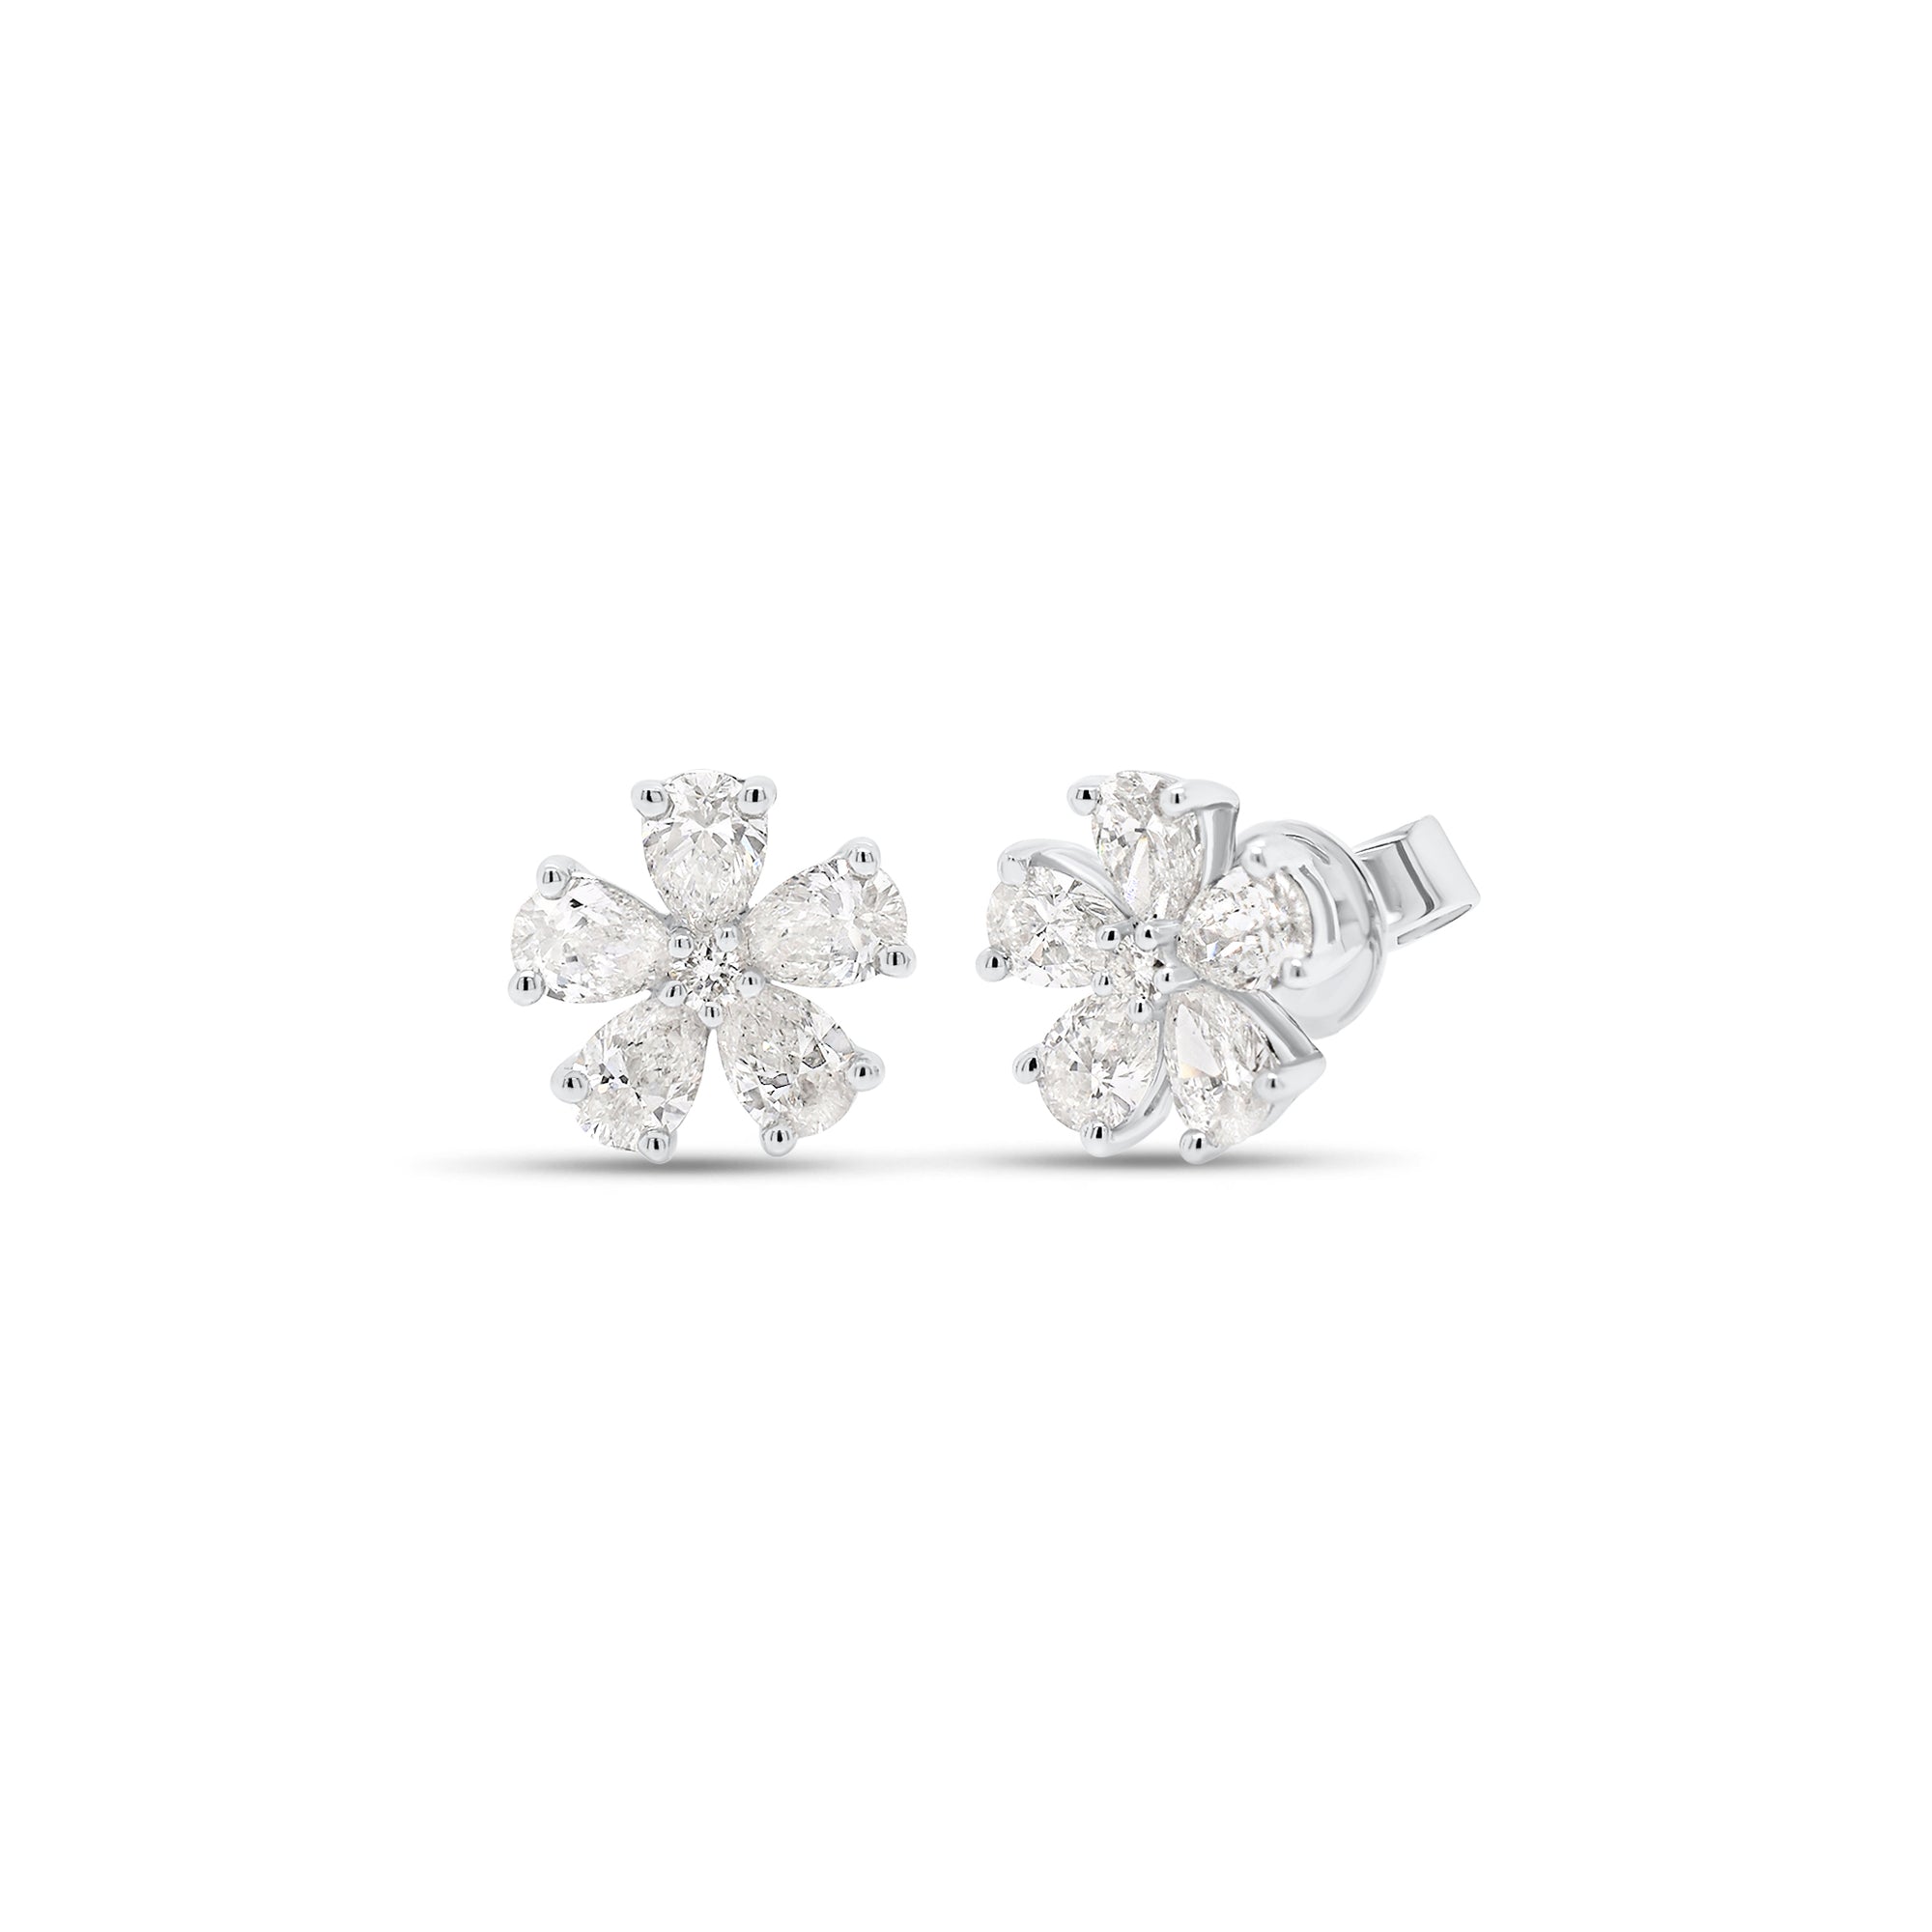 Diamond Flower Stud Earrings - 18K white gold weighing 2.09 grams  - 10 pear-shaped diamonds weighing 1.36 carats  - 2 round diamonds weighing 0.04 carats